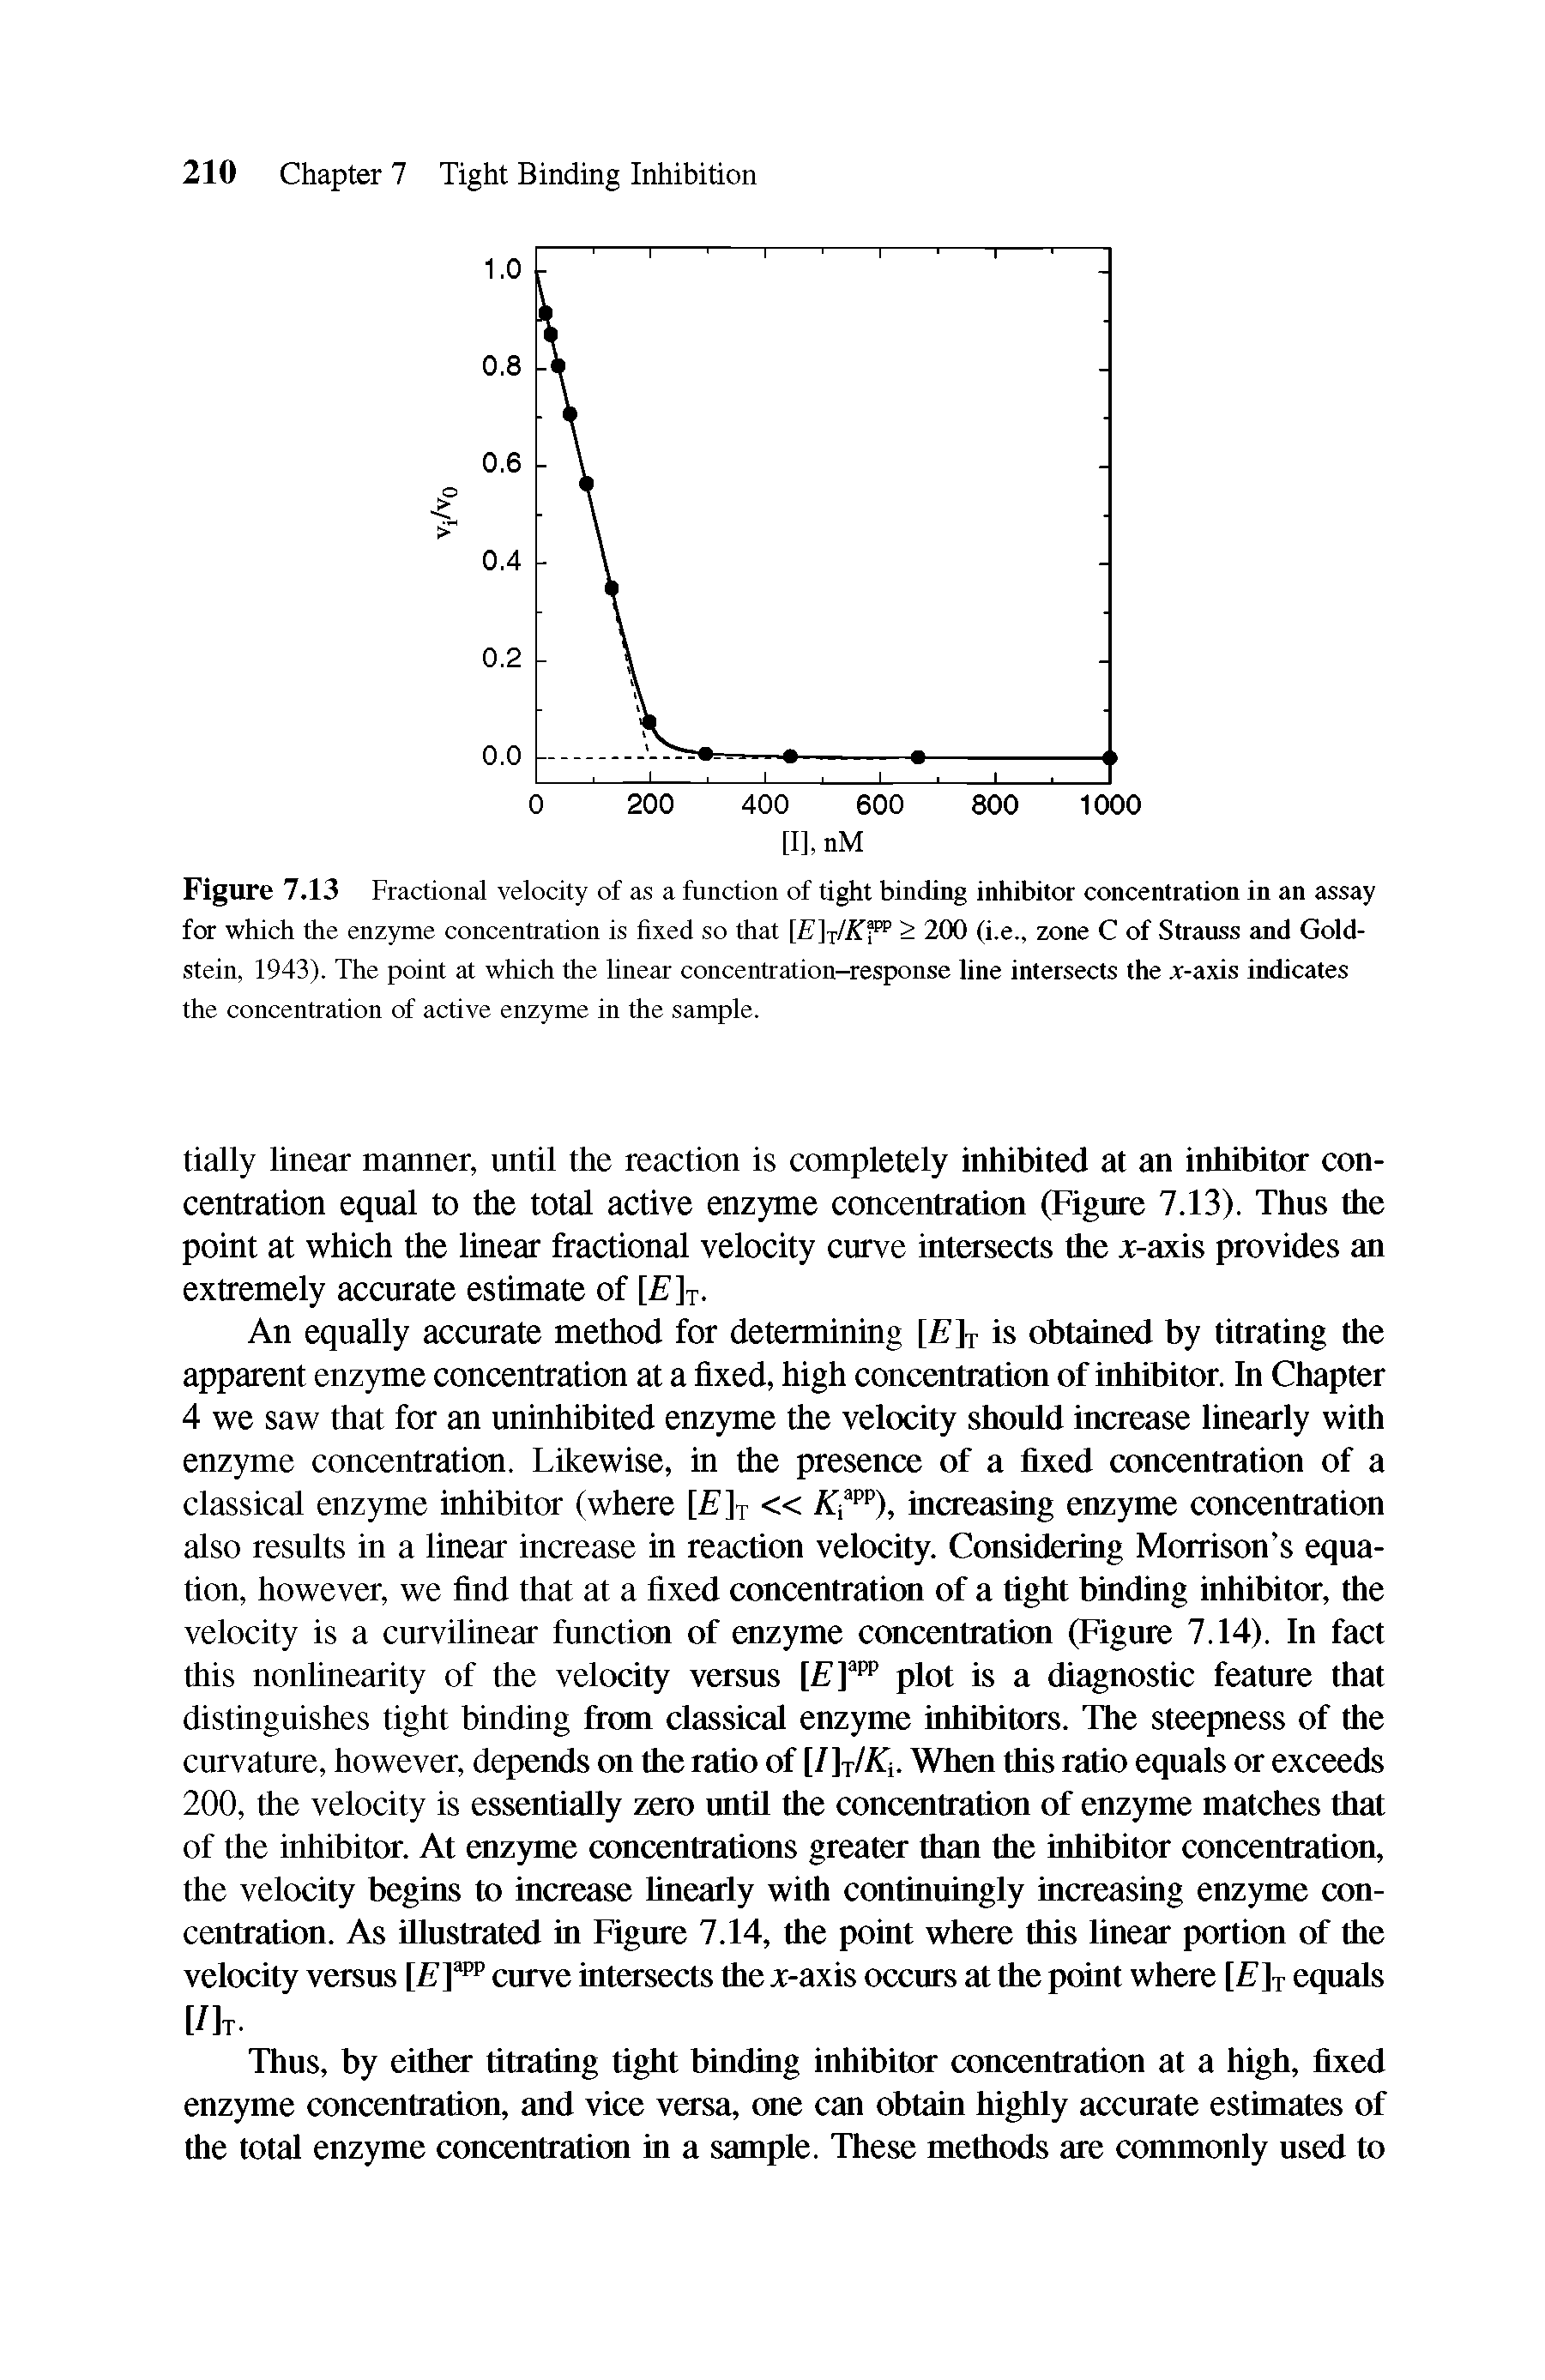 Figure 7.13 Fractional velocity of as a function of tight binding inhibitor concentration in an assay for which the enzyme concentration is fixed so that [E j/Kf9 > 200 (i.e., zone C of Strauss and Goldstein, 1943). The point at which the linear concentration-response line intersects the x-axis indicates the concentration of active enzyme in the sample.